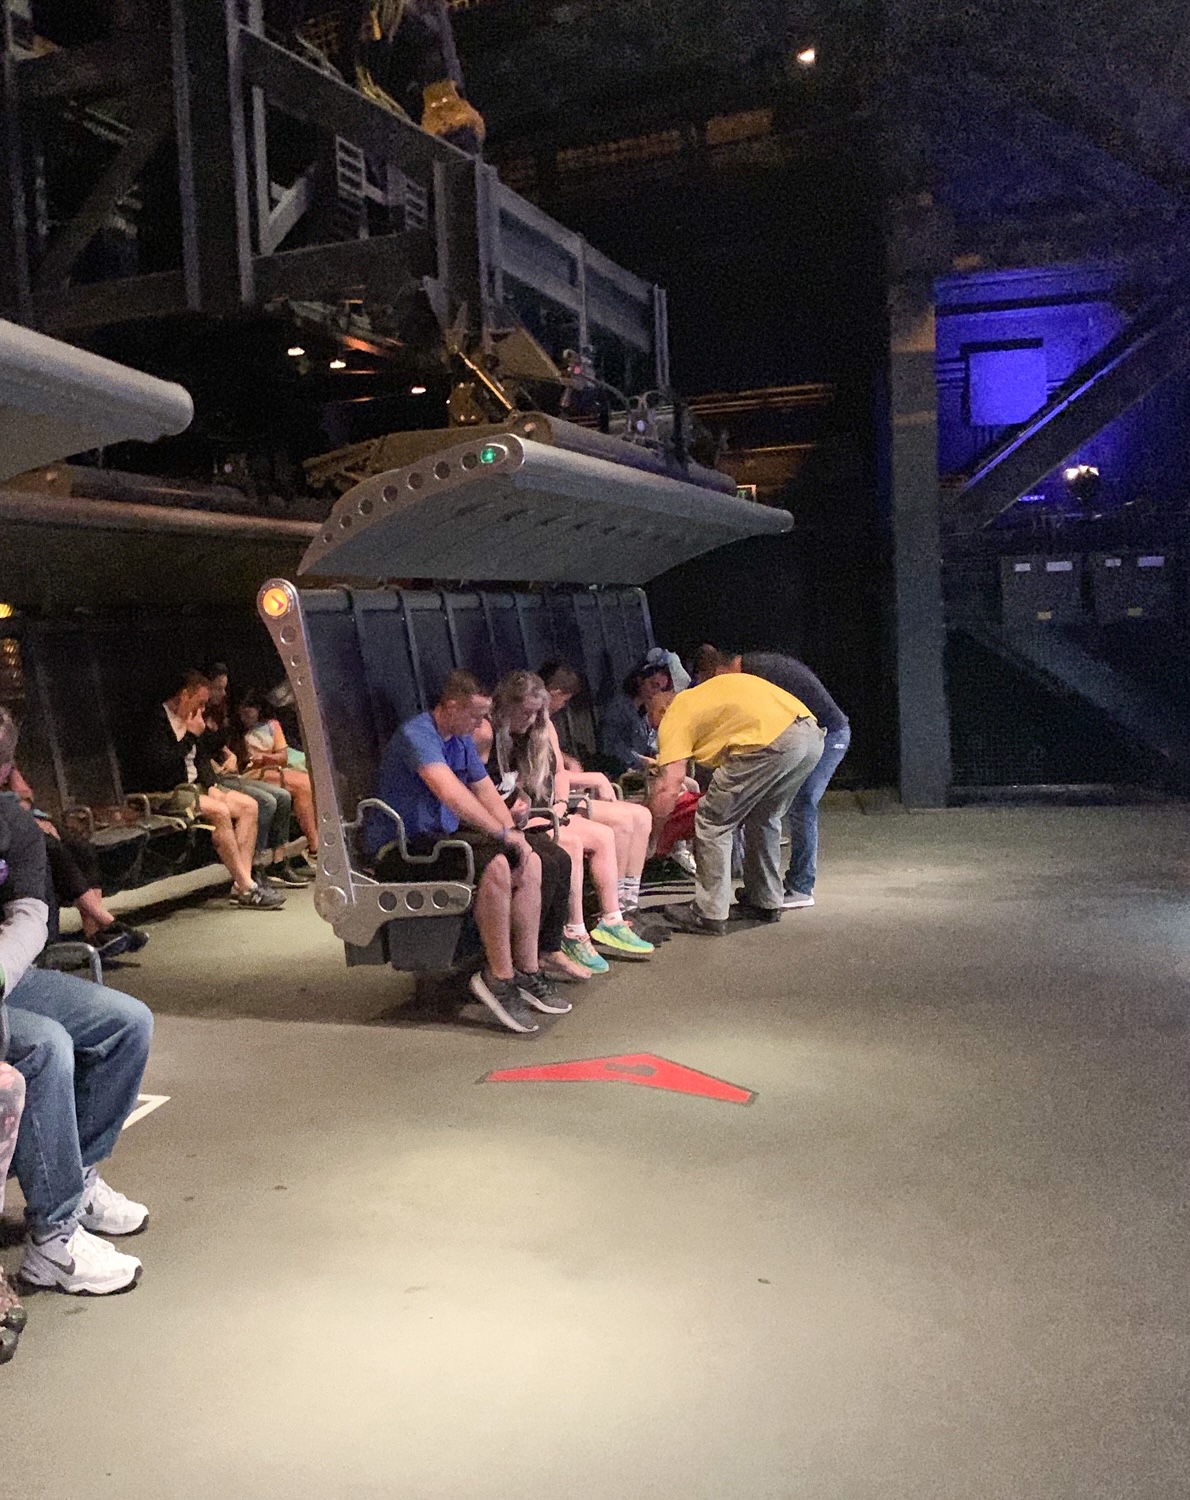 On soarin' you can't place your bag on the ride, in the basket underneath instead. The seats of the ride are pictured